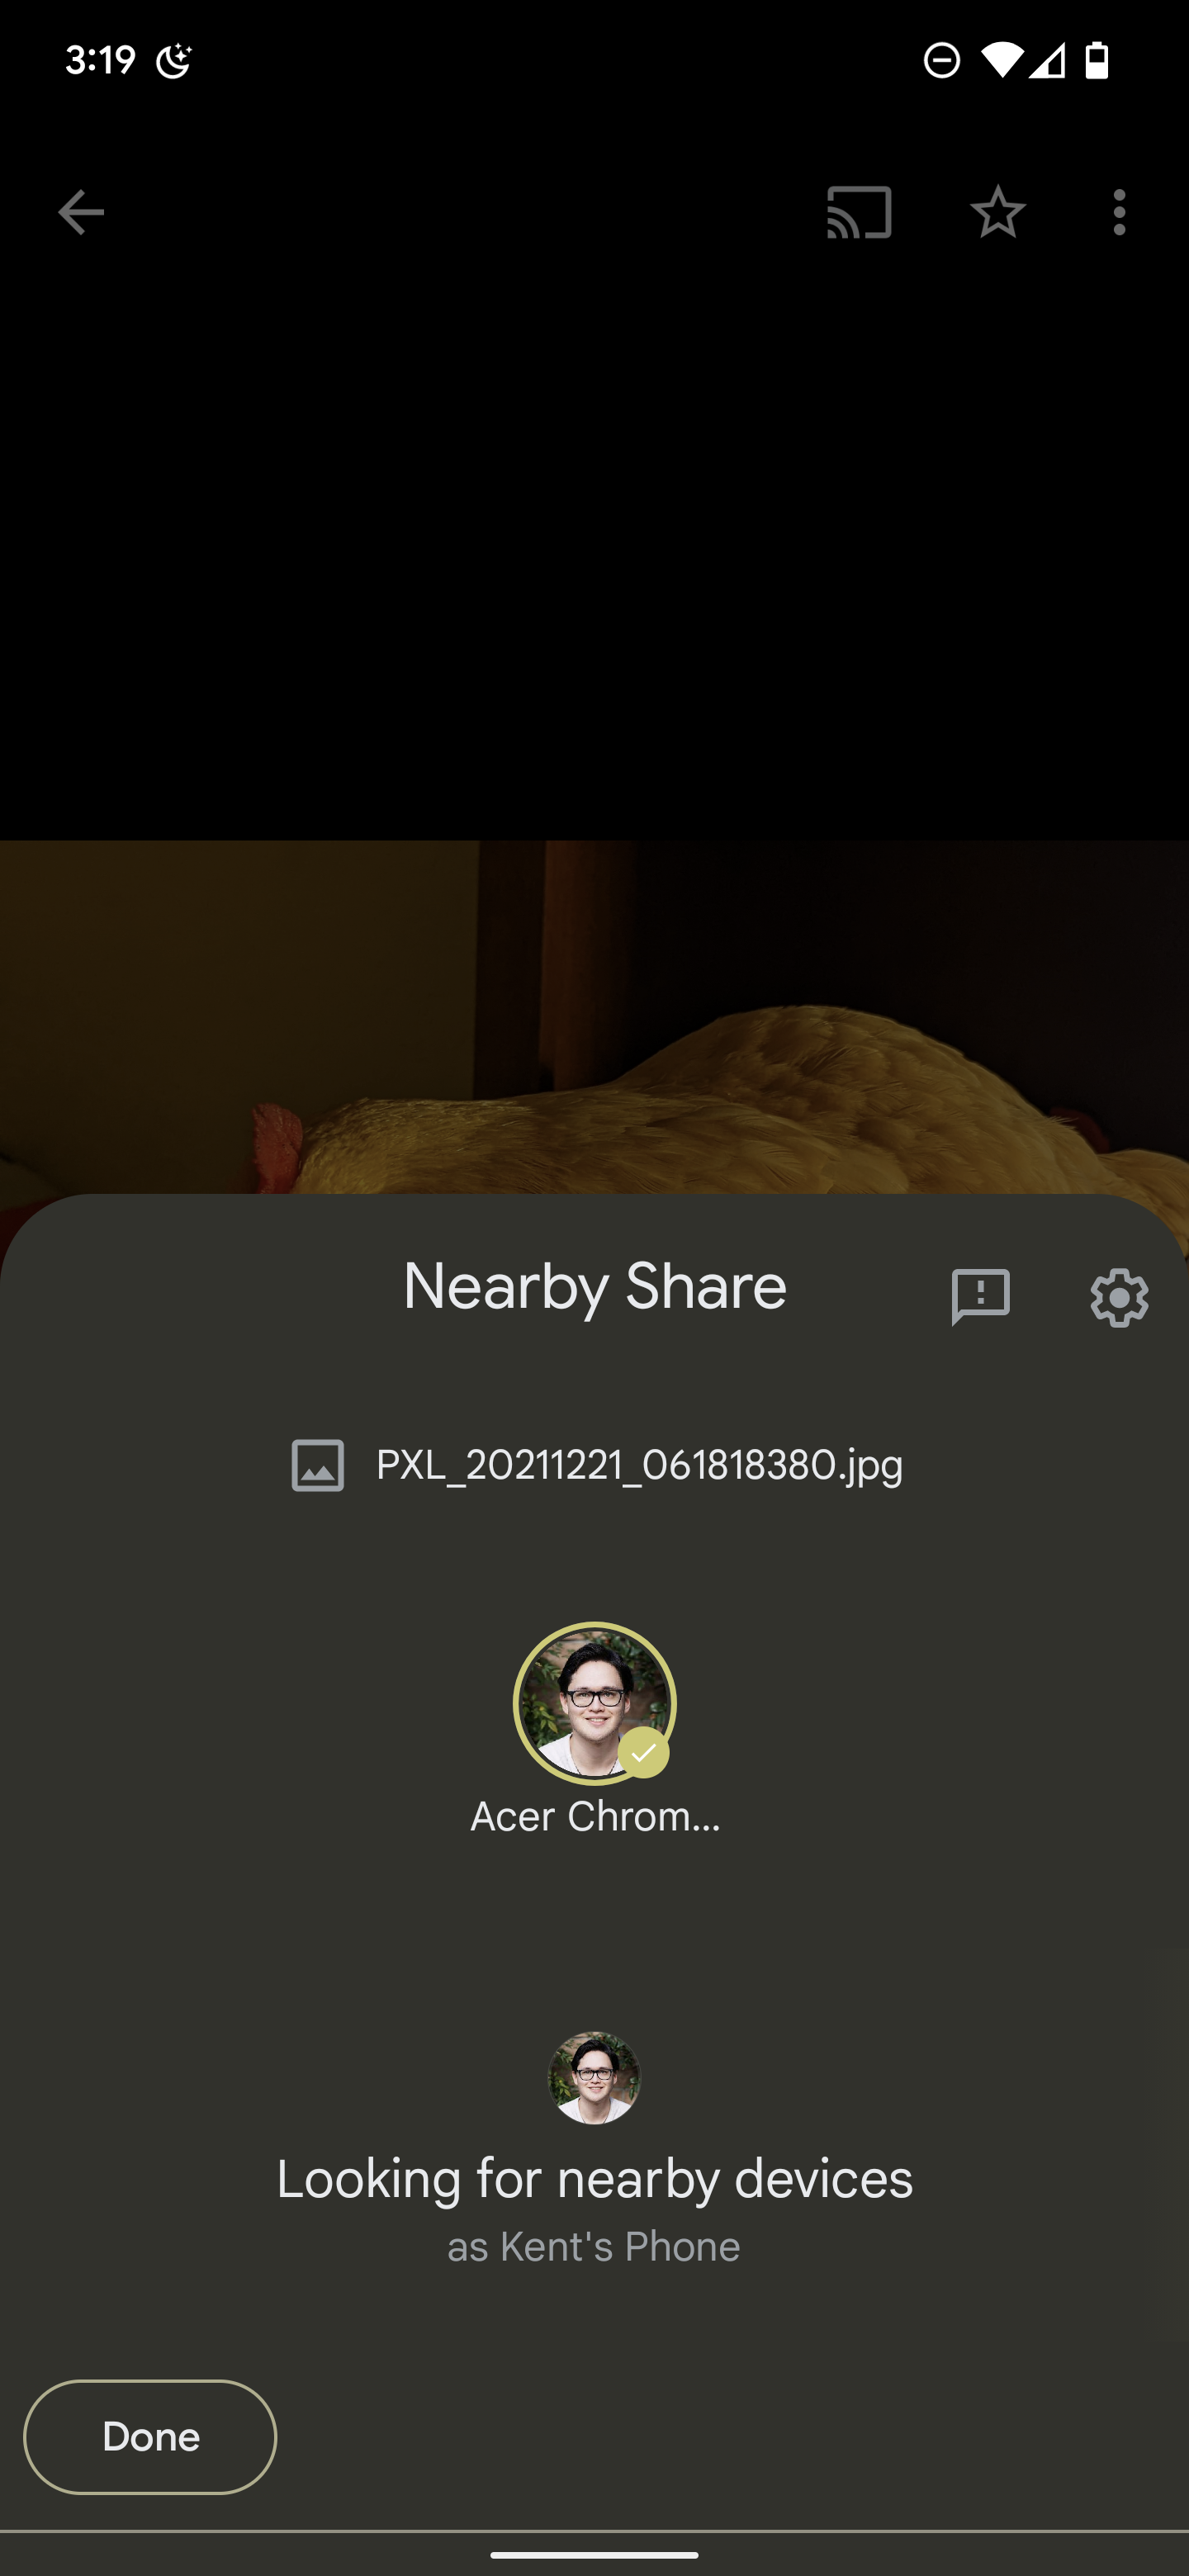 nearby sharing on an android device